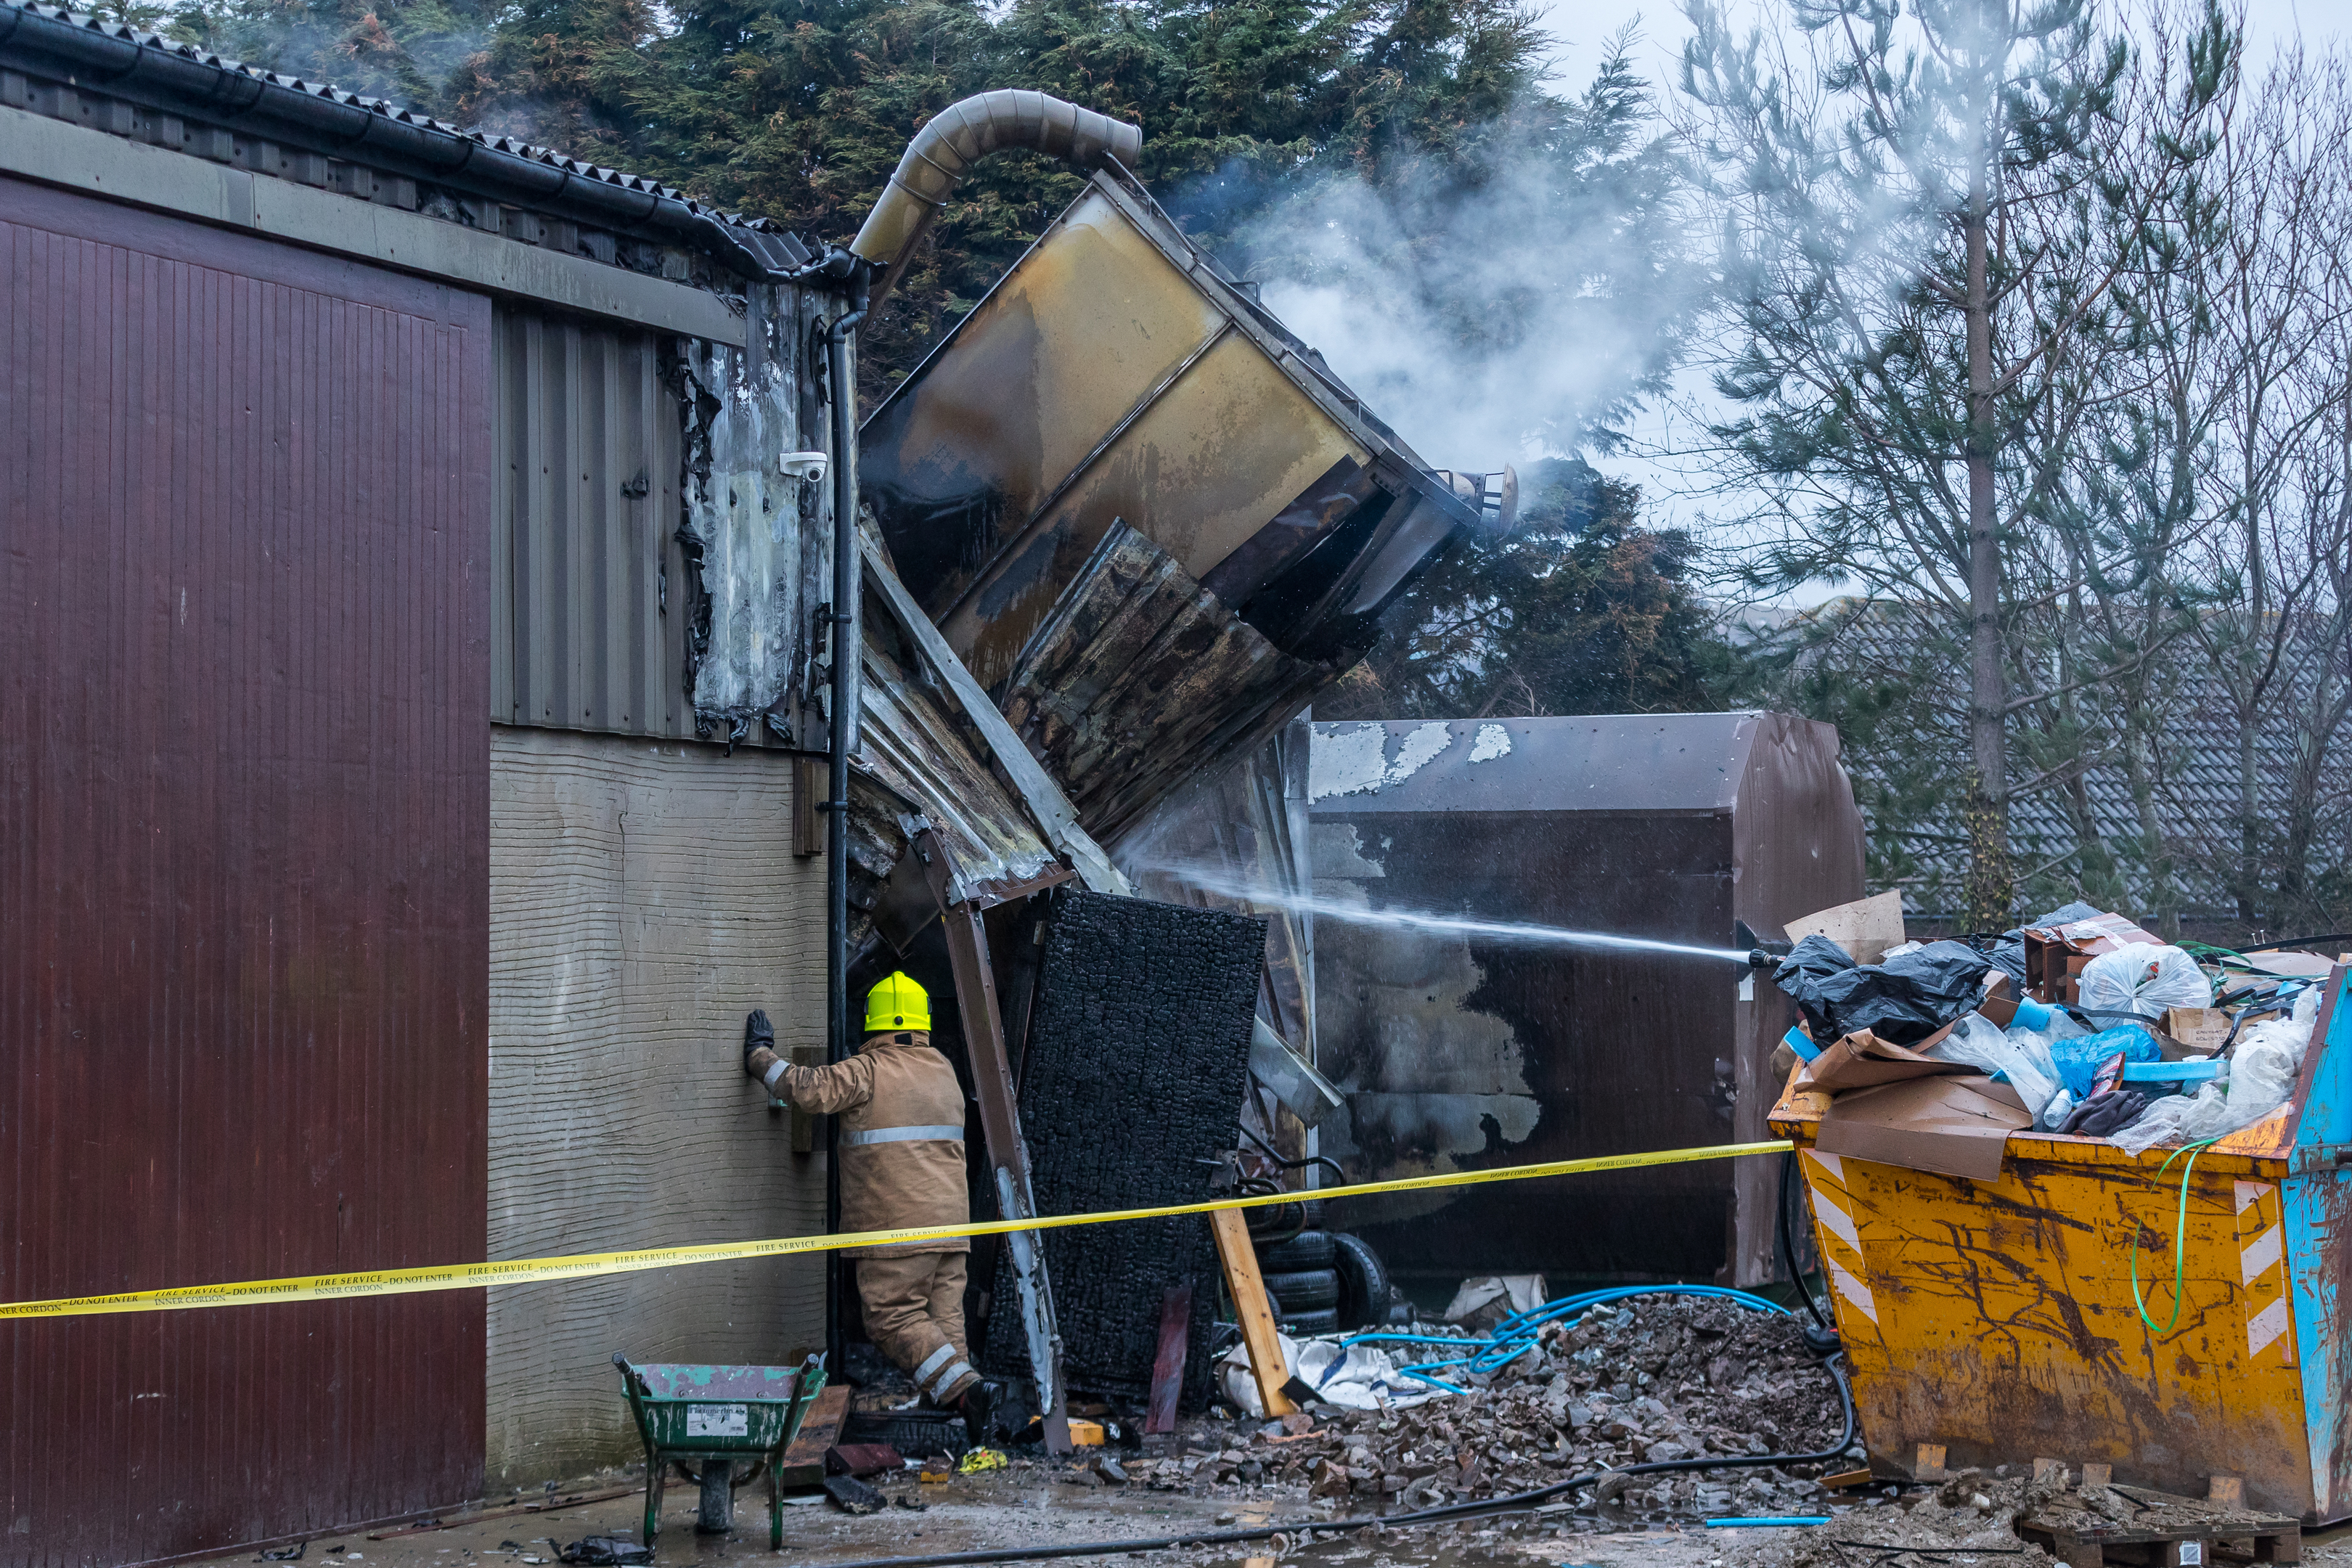 This is the scene of the Fire at Glenglassaugh Workshop, Portsoy, Banff AB45 2SQ on Saturday 10 March 2018.